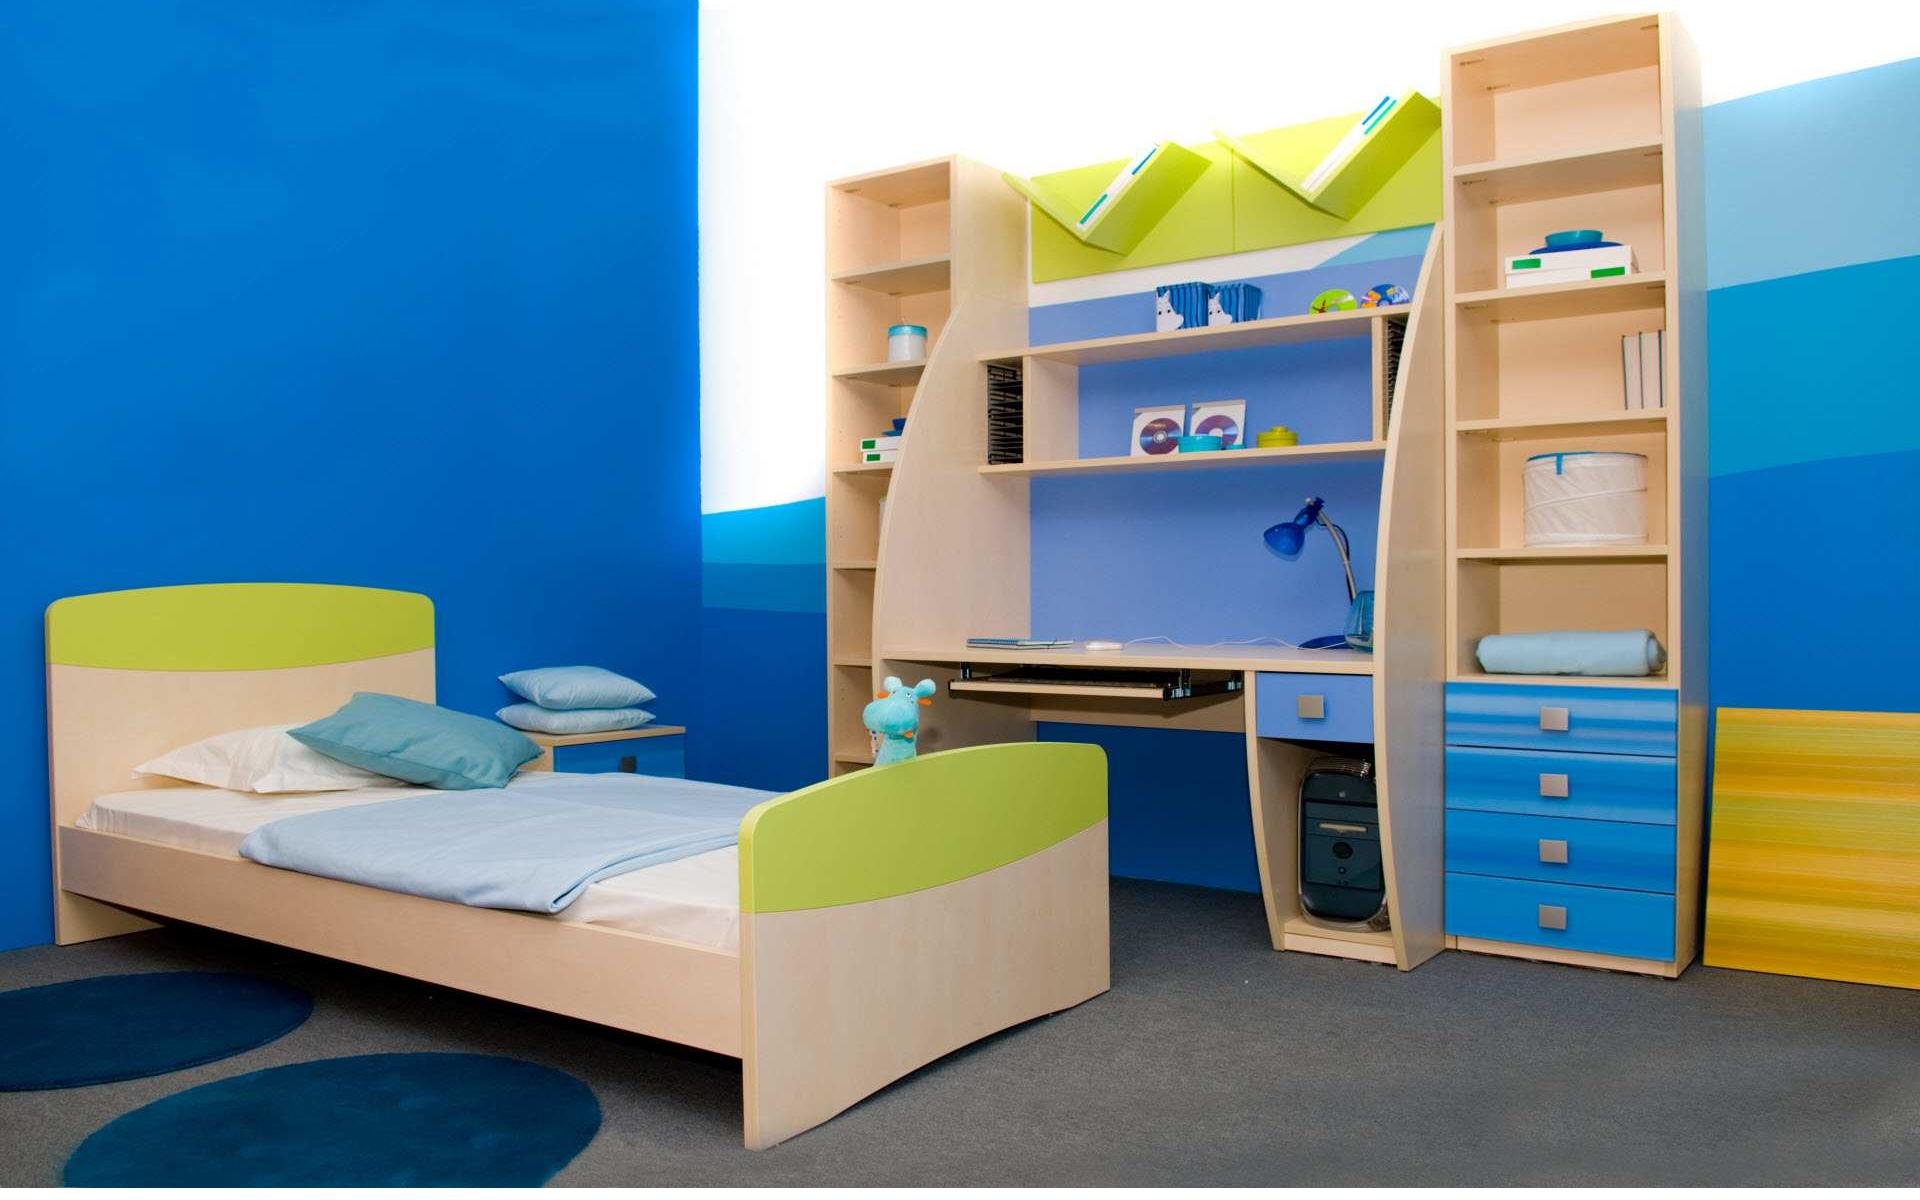 Kids Room Interior Design: Creating A Safe And Fun Environment For Kids